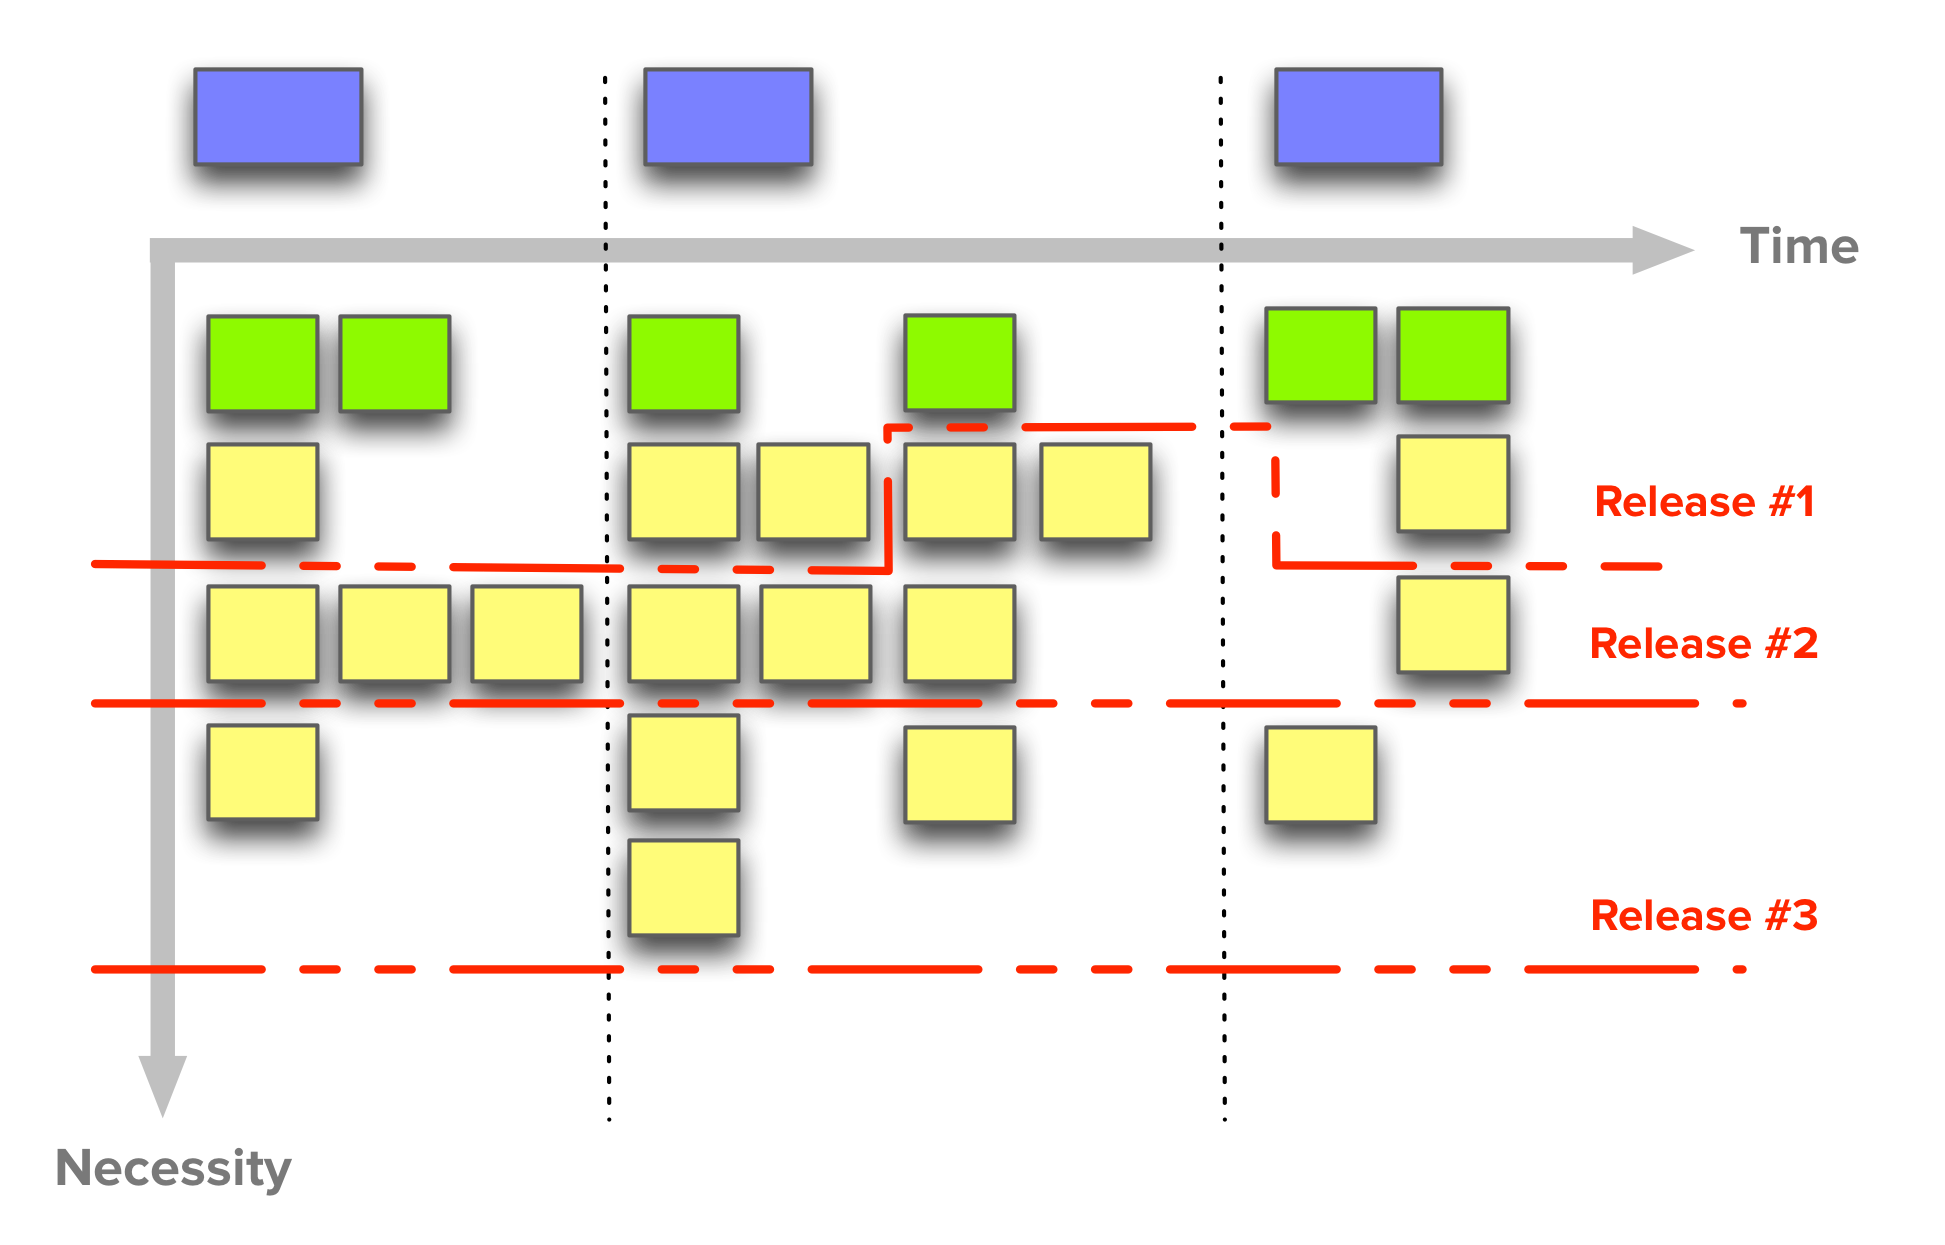 Release planning with Story Maps: "breadth-first implementation"